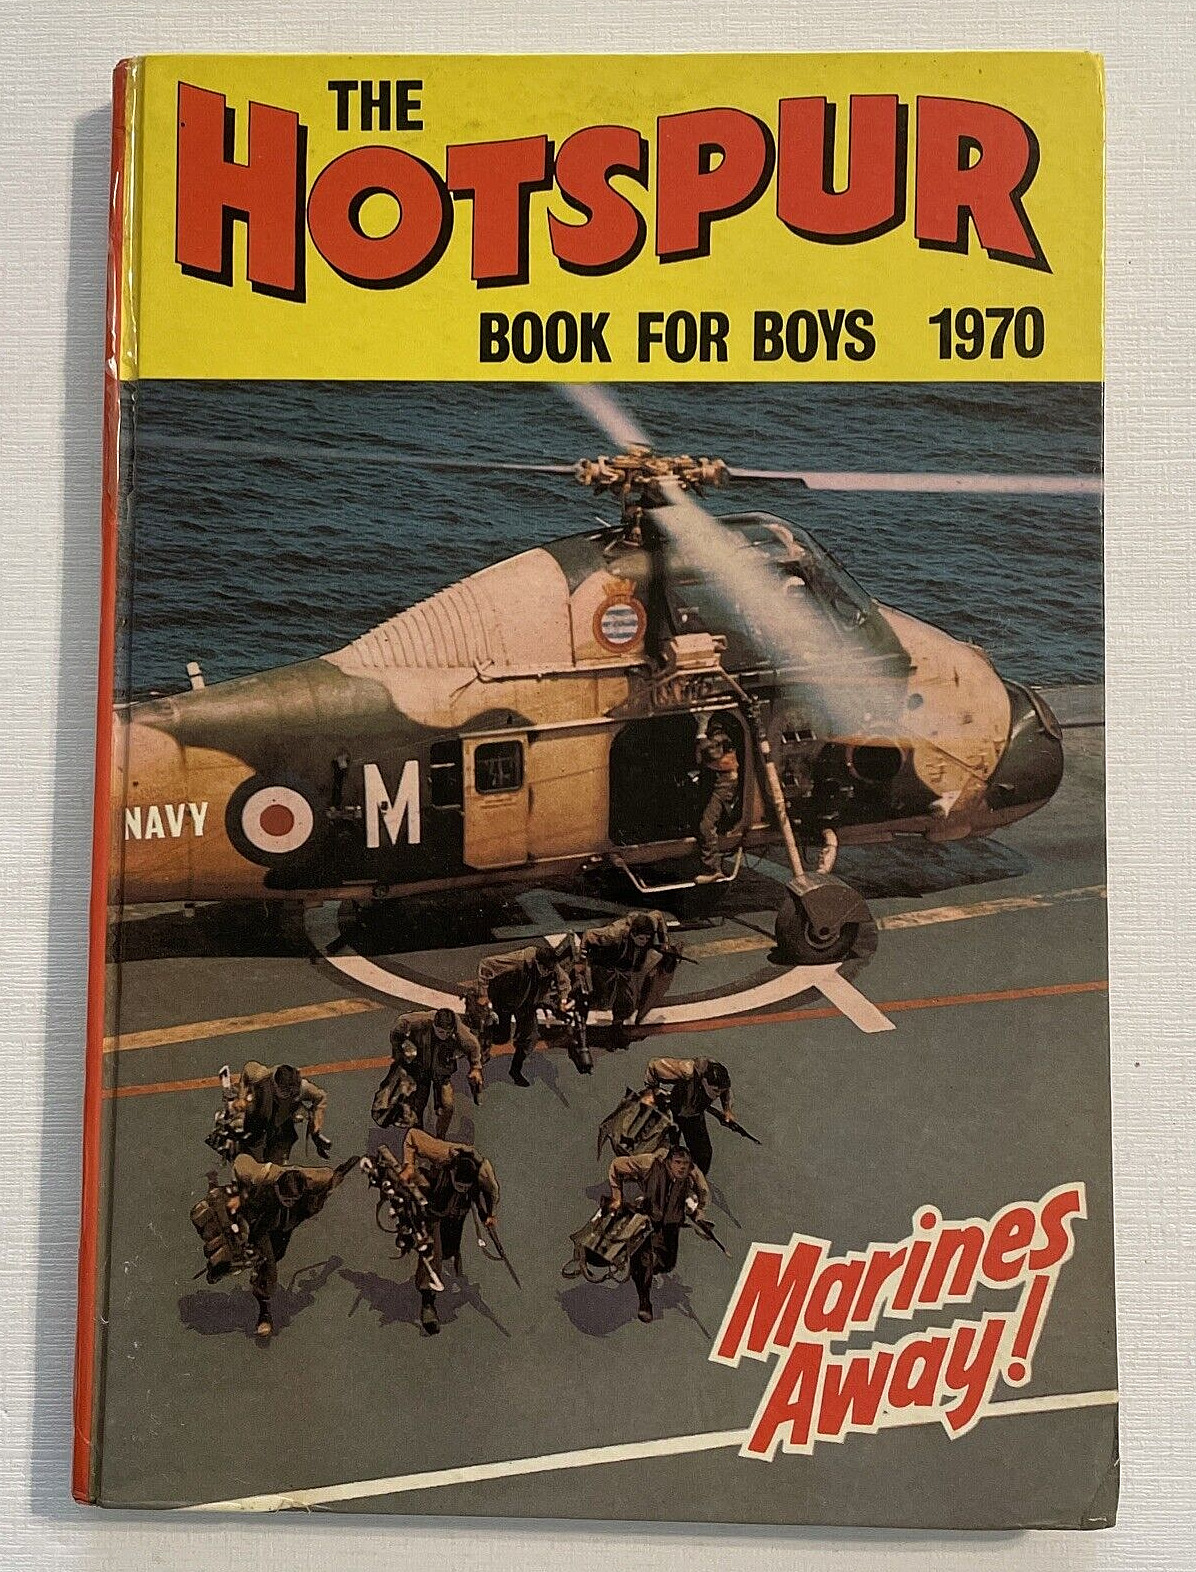 Hotspur Book For Boys 1970 Marines Away” Hardcover UK Vintage Bronze Age Comic C